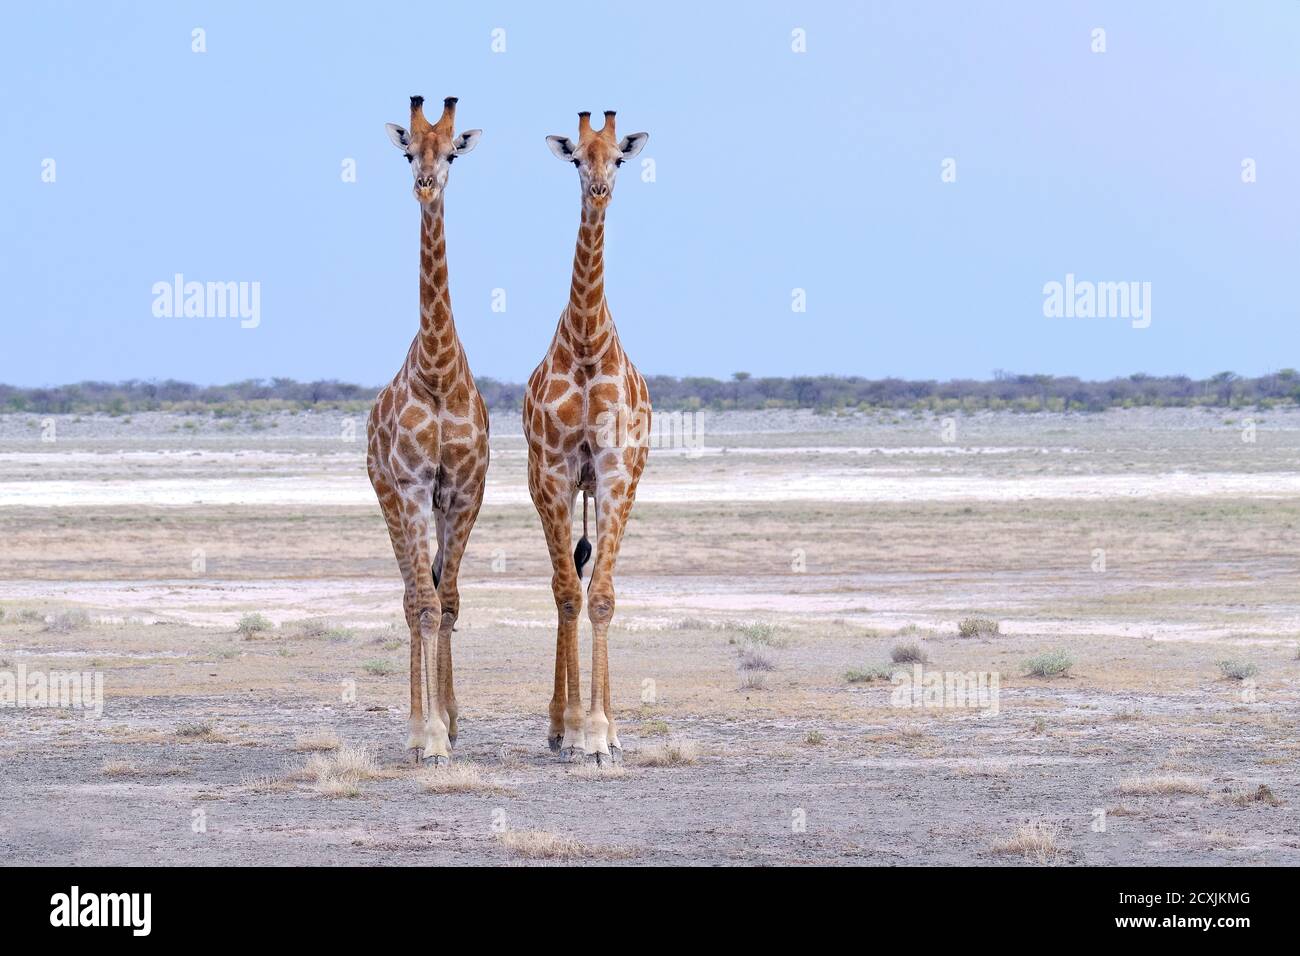 Giraffe, Giraffa, two Giraffes are standing in the salt pan in Etosha National Park and look directly into the camera. Namibia, Africa. Stock Photo